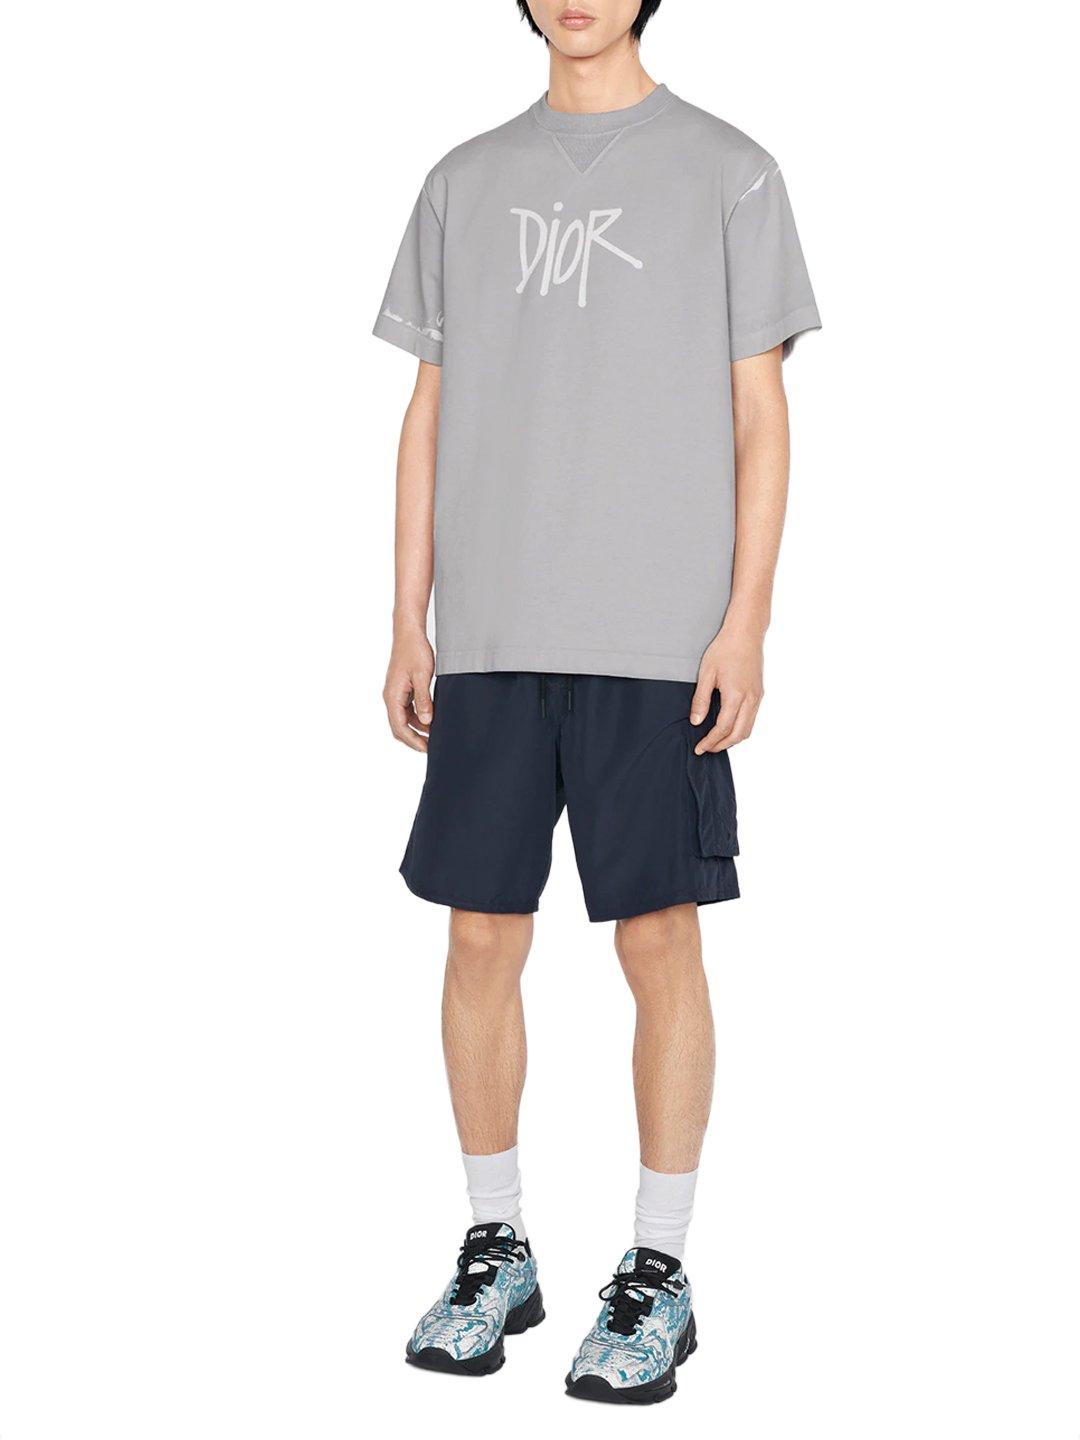 Dior T-shirt Dior And Shawn in Grey for Men | Lyst Canada